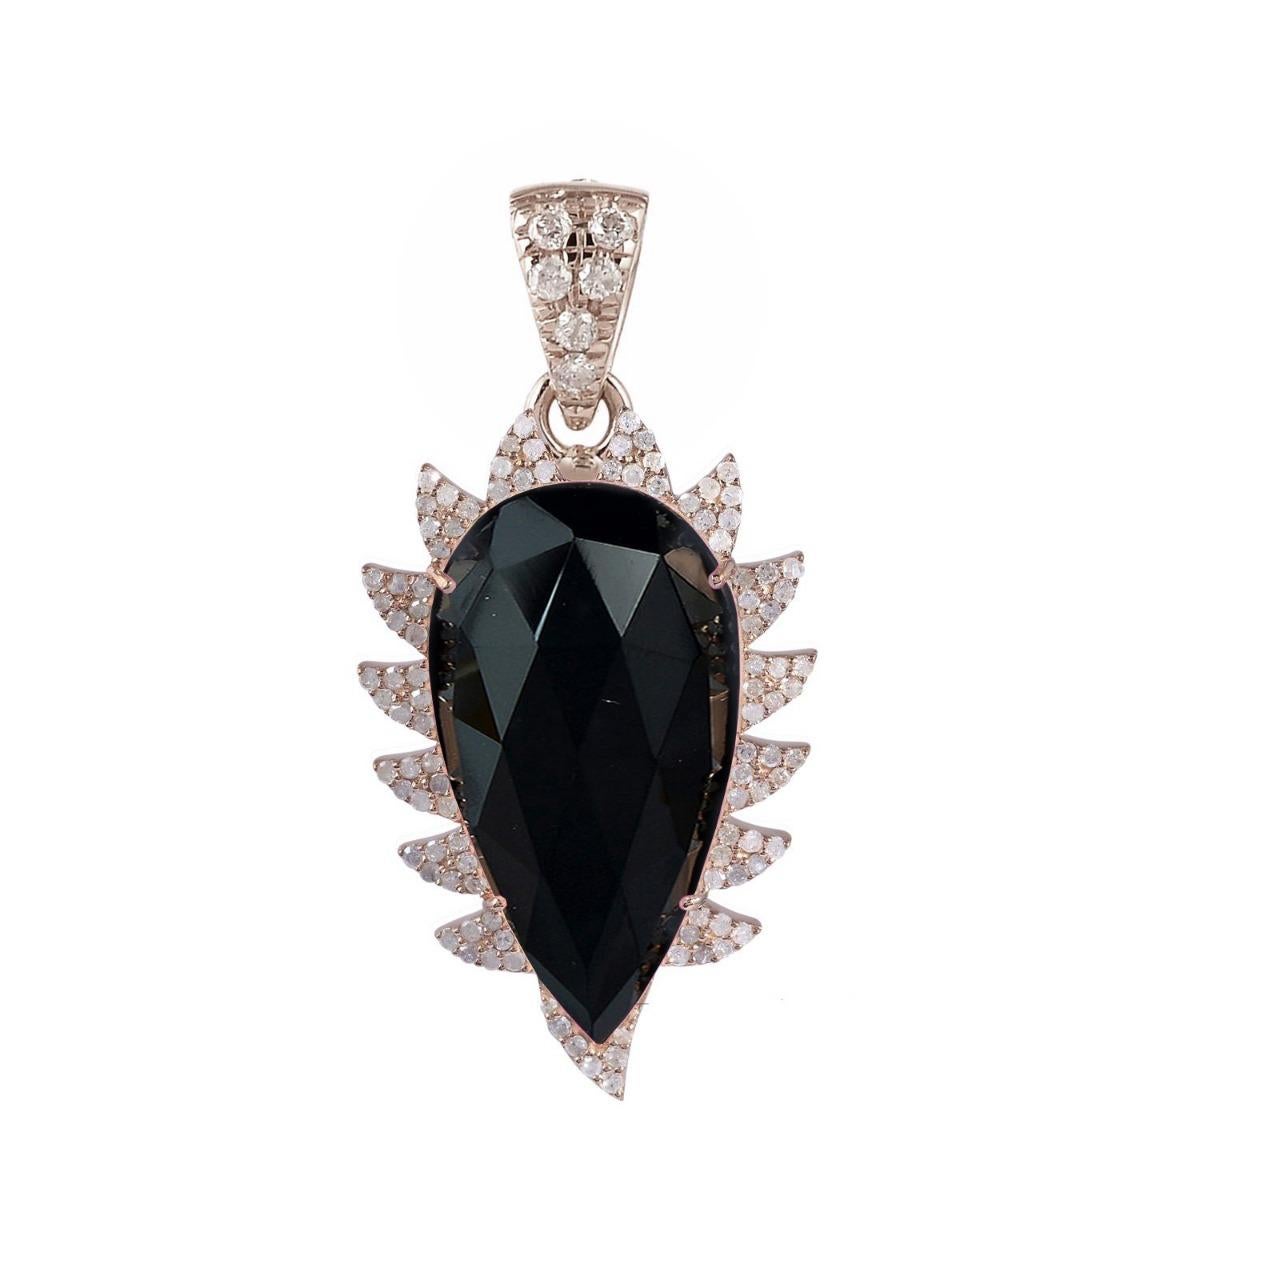 Renowned for its modern & fierce jewelry, 